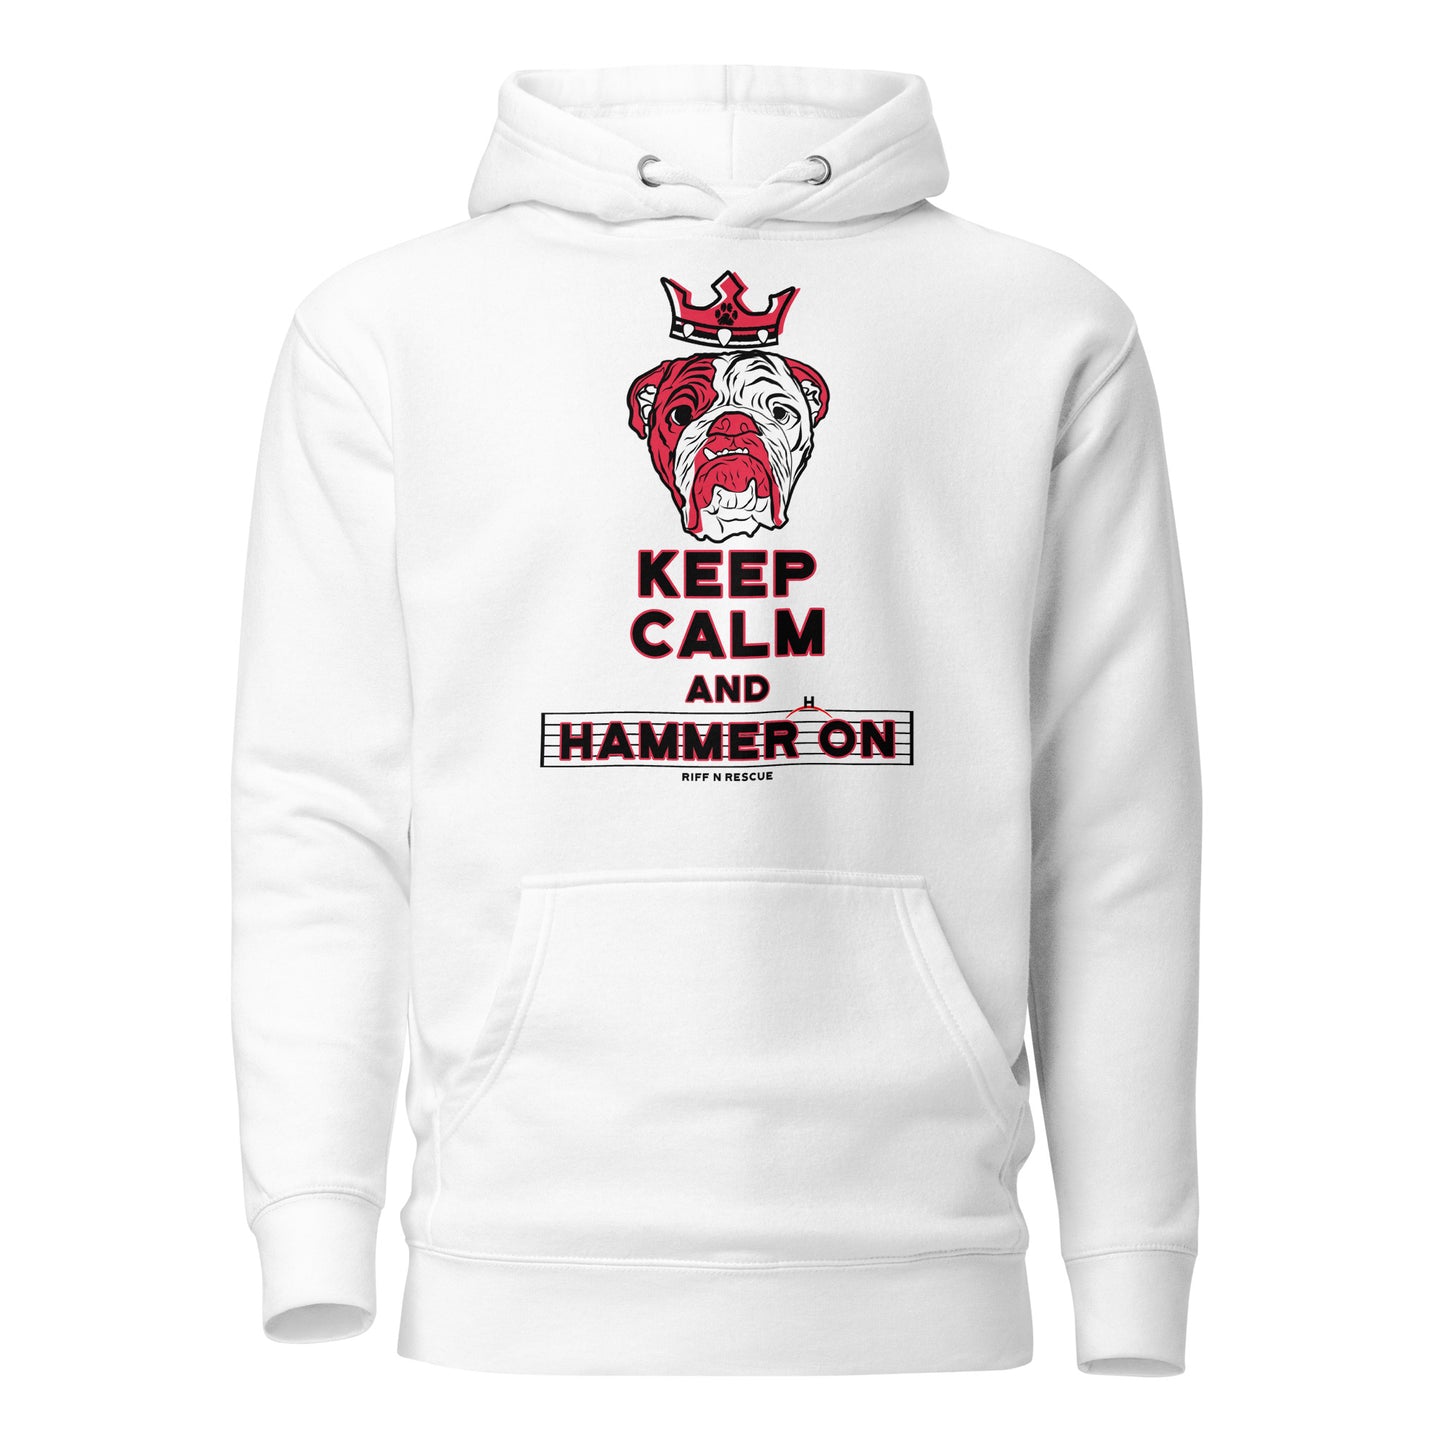 Keep Calm and Hammer On Unisex Hoodie